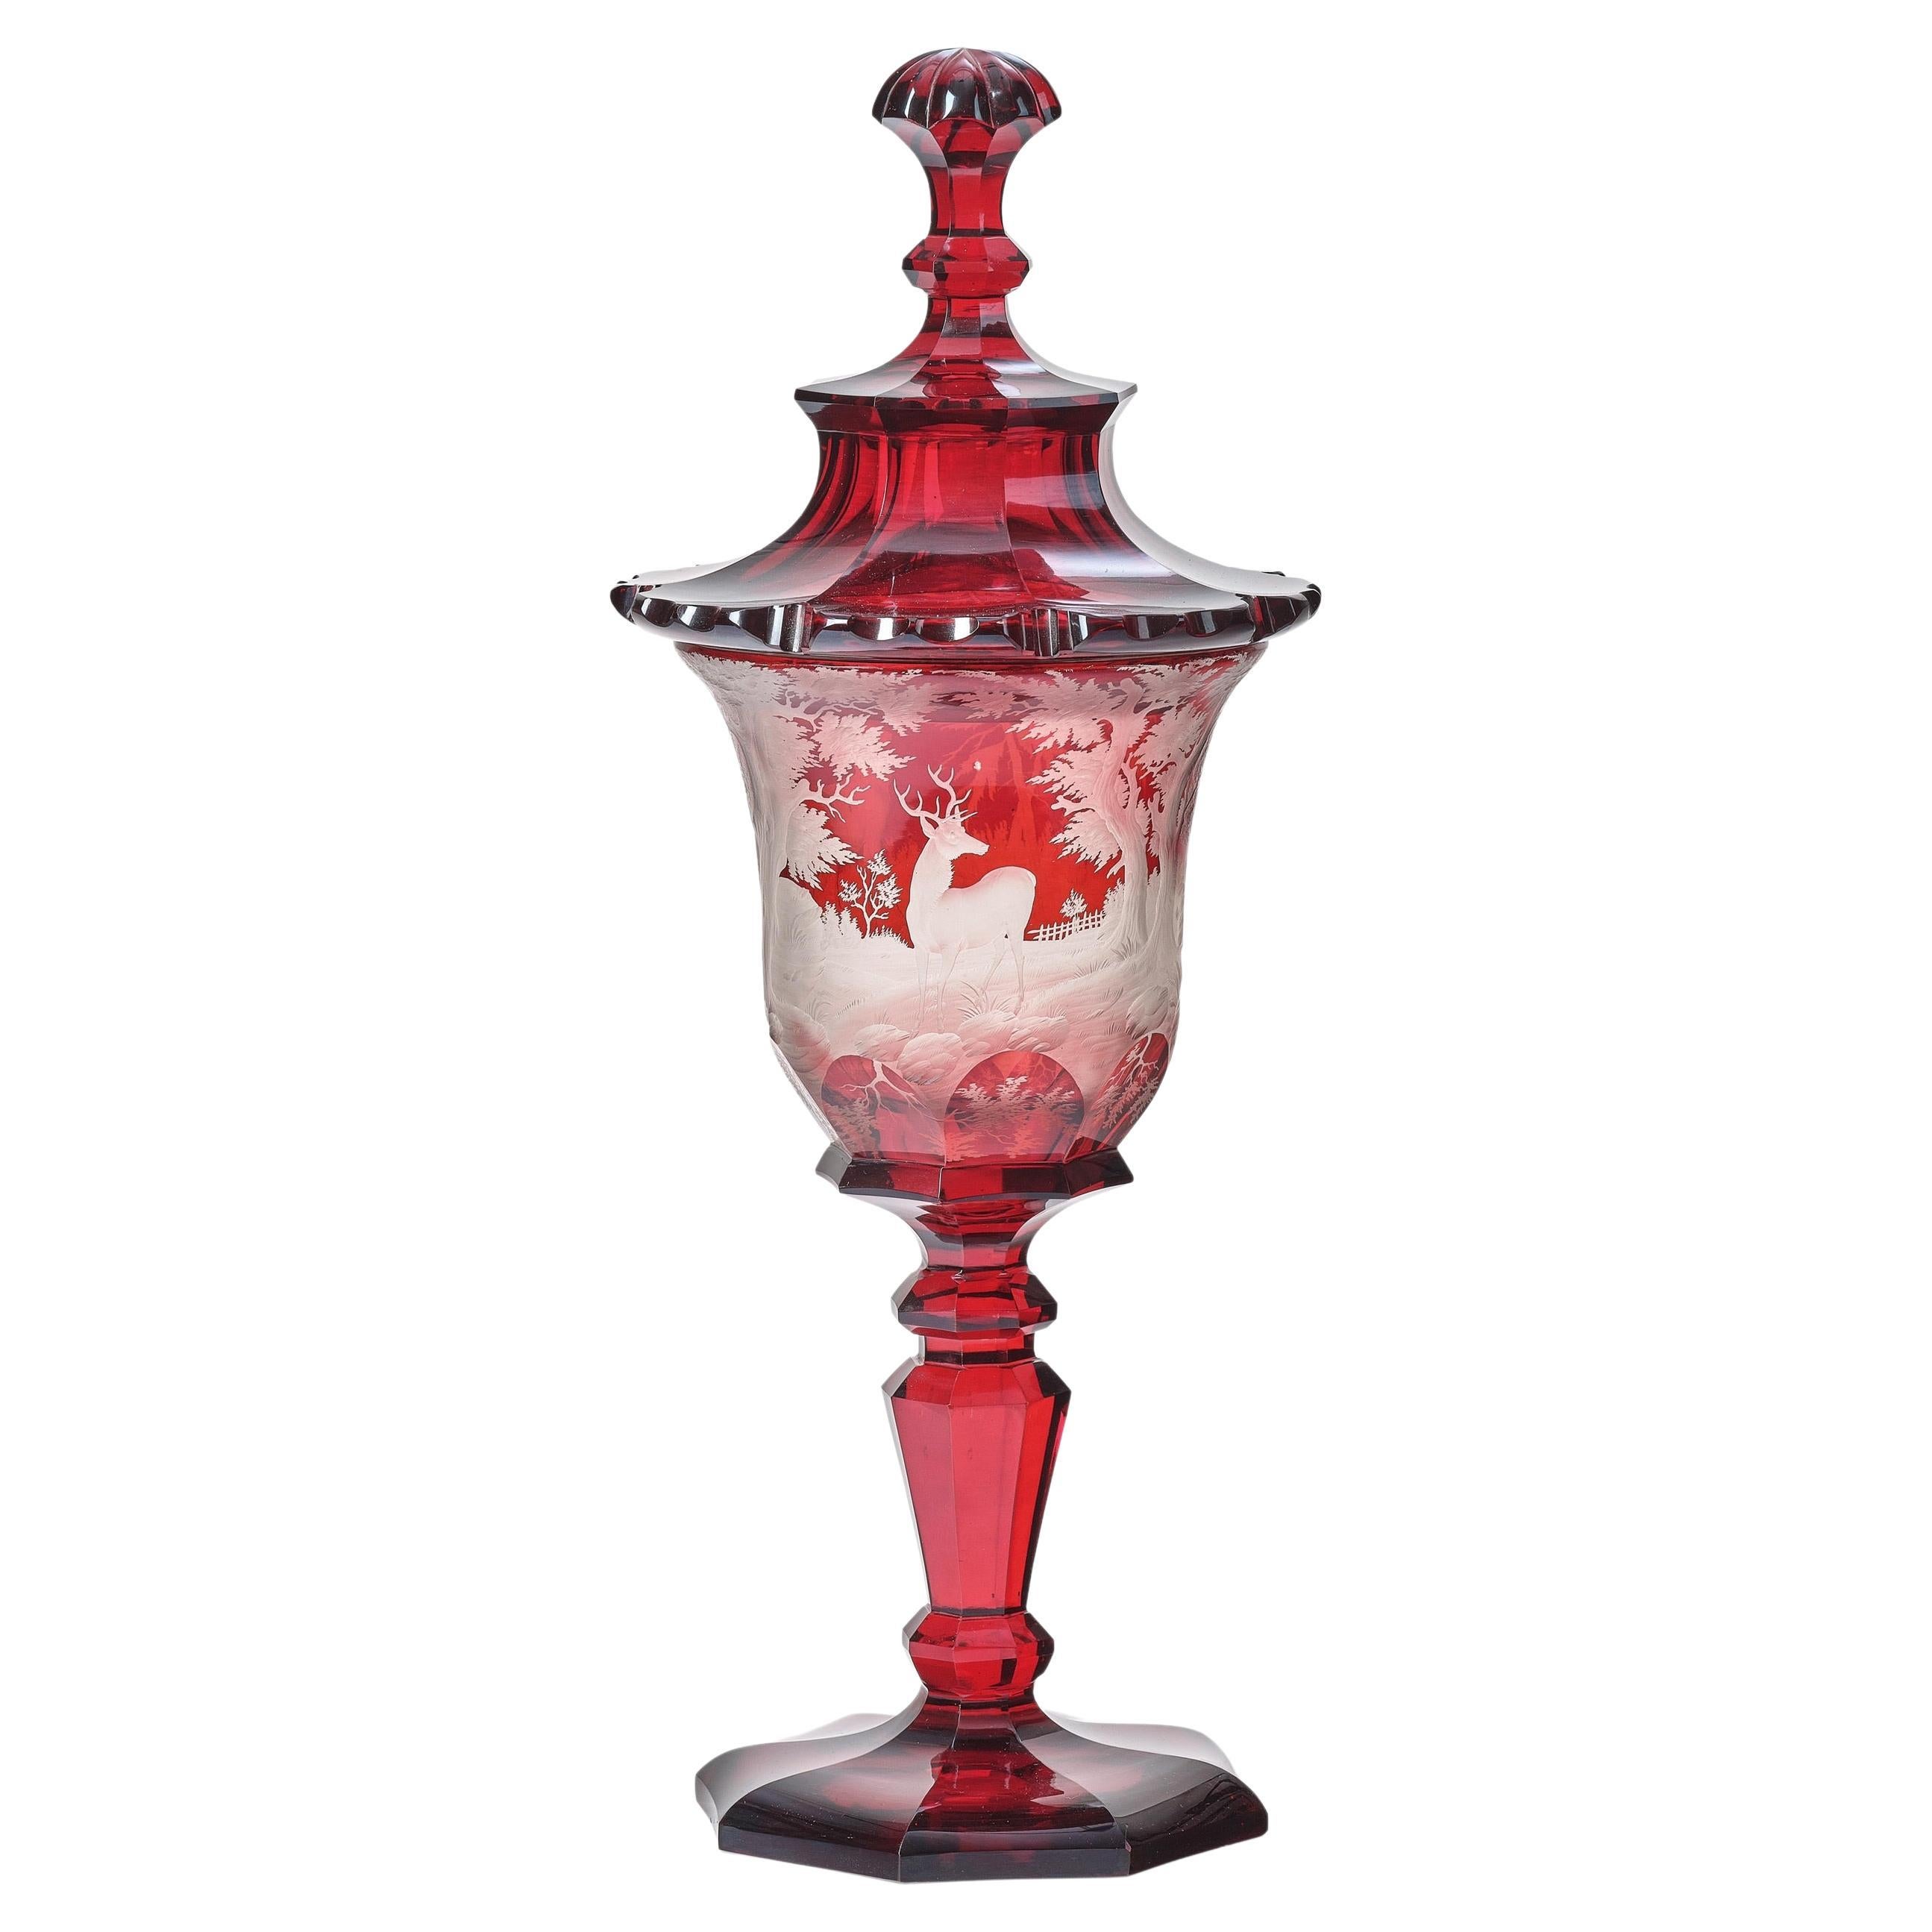 https://a.1stdibscdn.com/antique-bohemian-ruby-red-engraved-glass-goblet-dated-1852-for-sale/f_65132/f_323856421674555988776/f_32385642_1674555989468_bg_processed.jpg